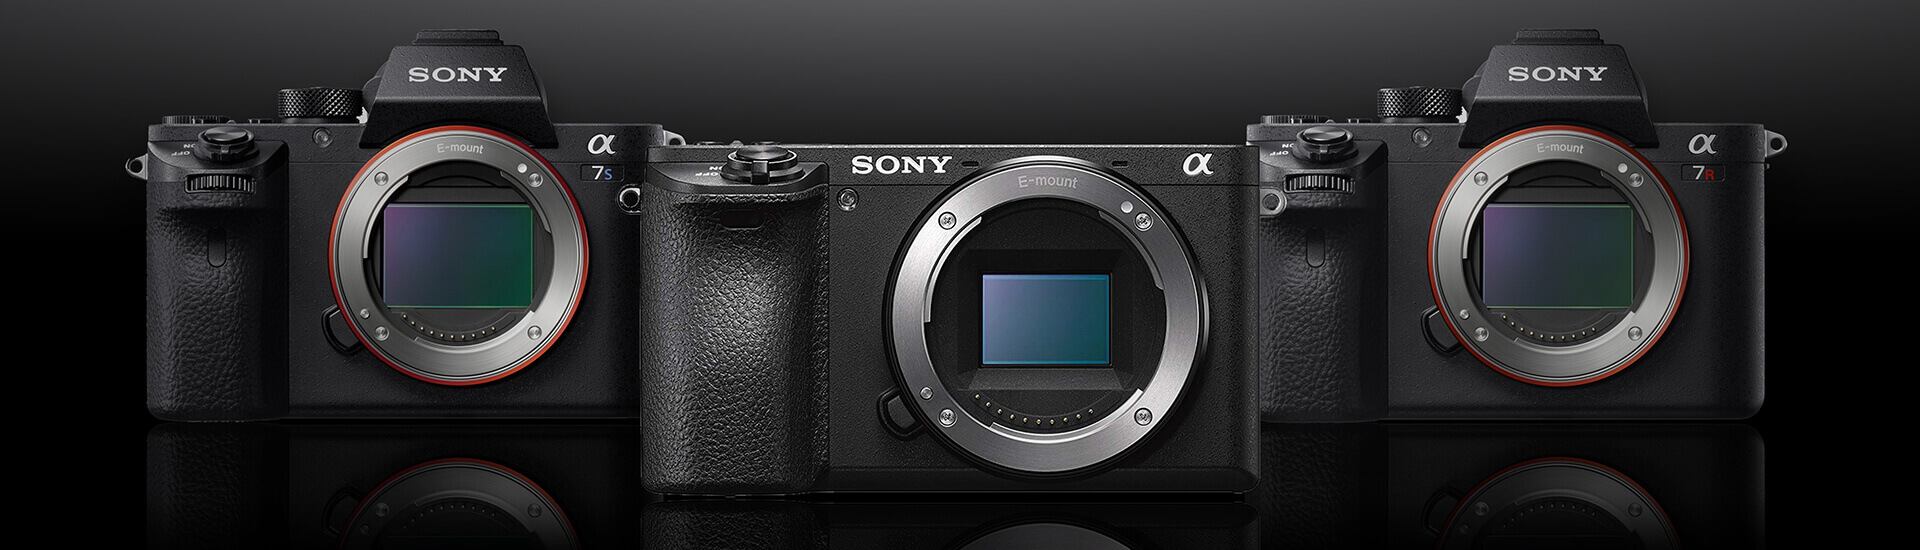 Sony Mirrorless Cameras: The Future of Videography